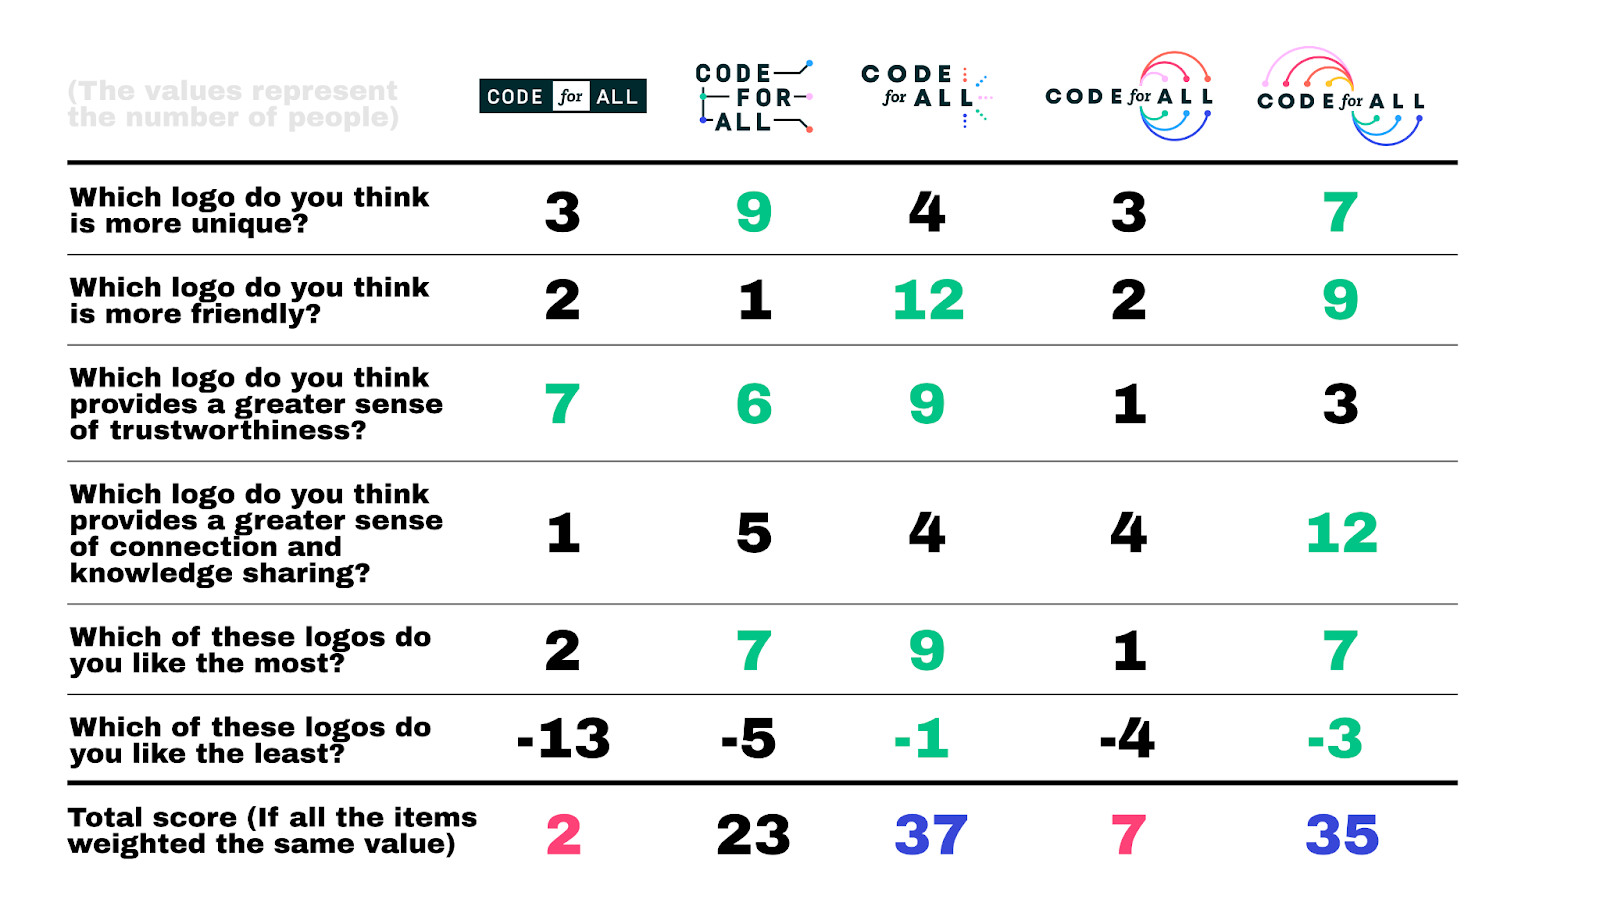 Table of voting results comparing 5 different Code for All logos.